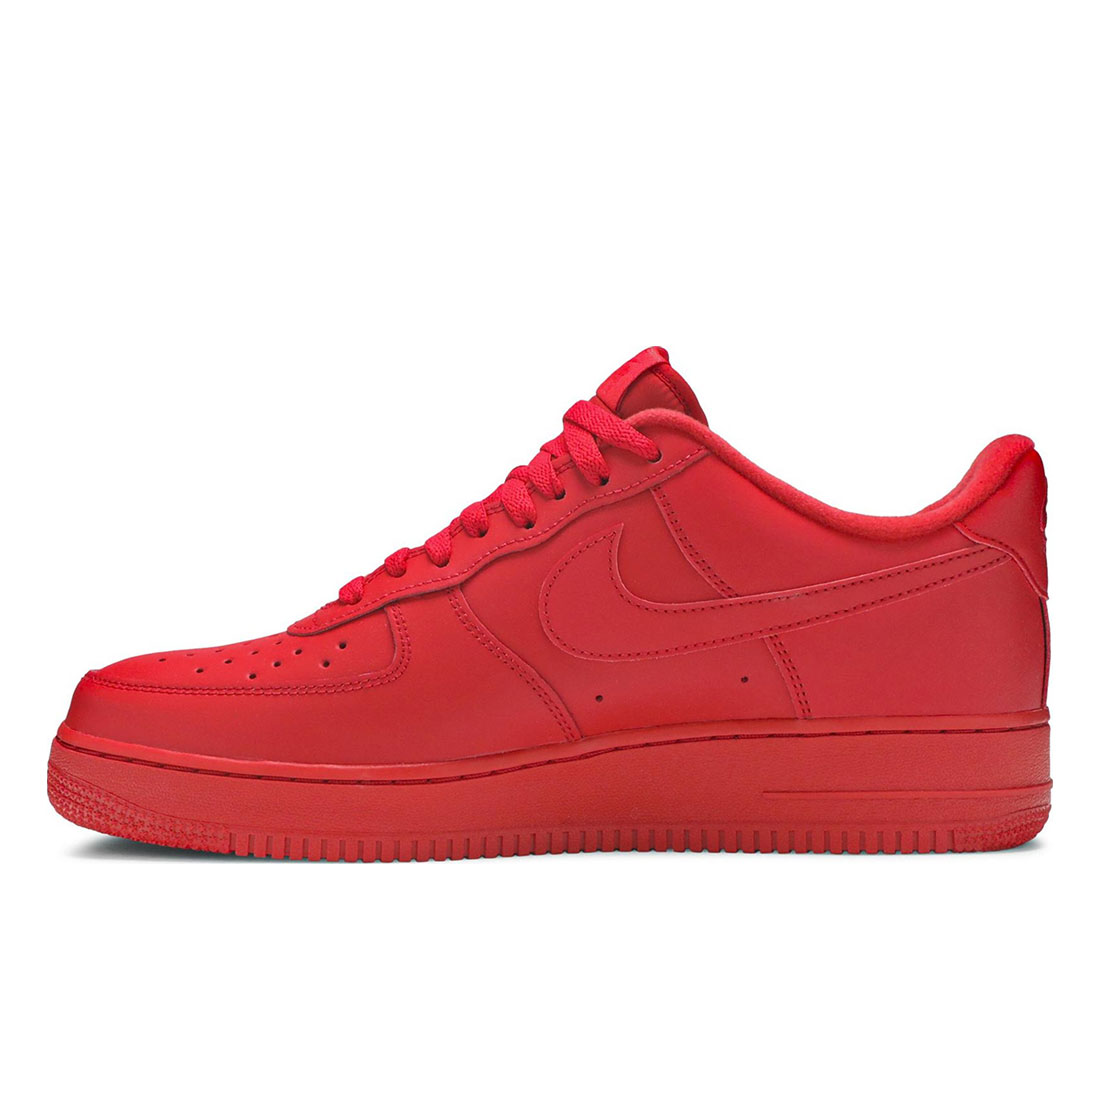 Air Force 1 Low 07 LV8 1 Triple Red